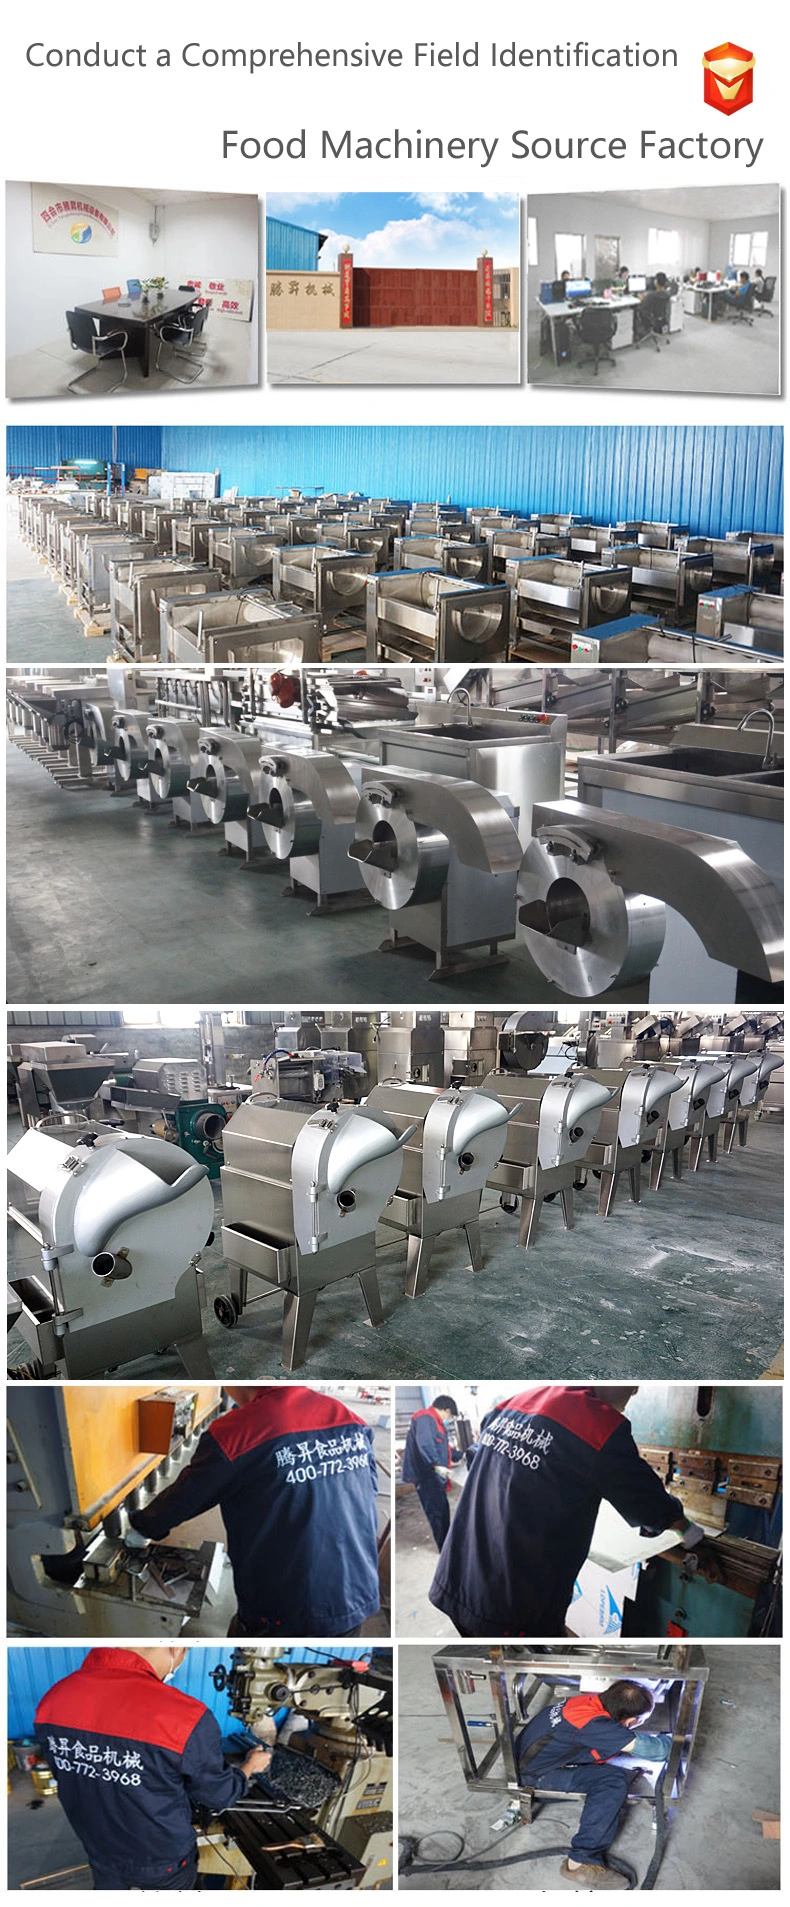 Commercial Vegetable Cutter Food Machine Conveyor Belt Type Soybean Seedling Cutting Machine (TS-Q698)